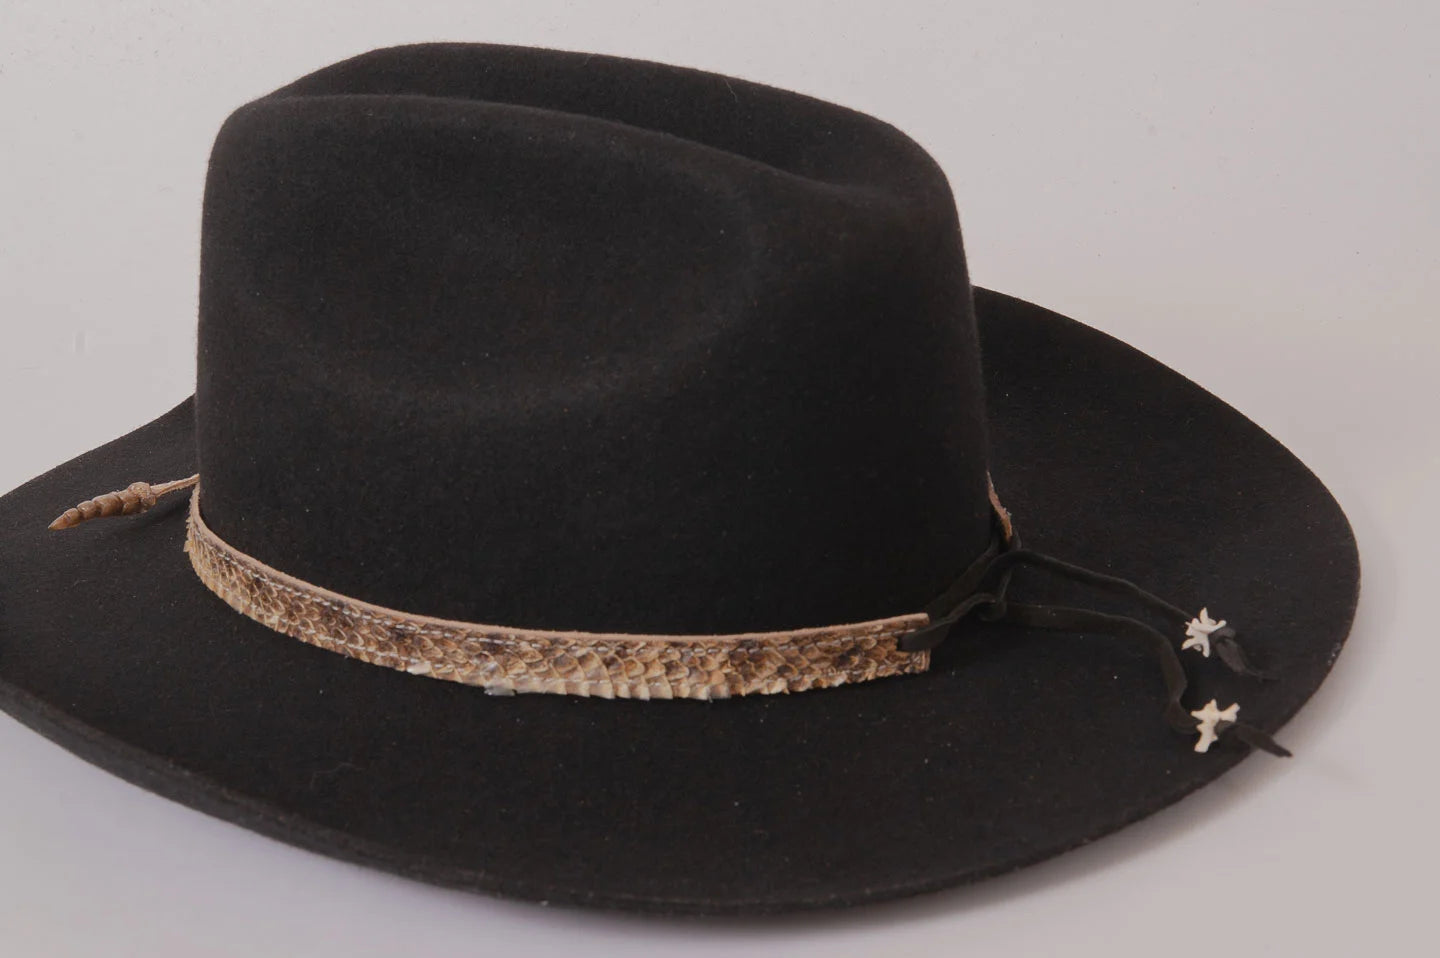 Cowboy hat with rattlesnake hat band by American Hat Makers